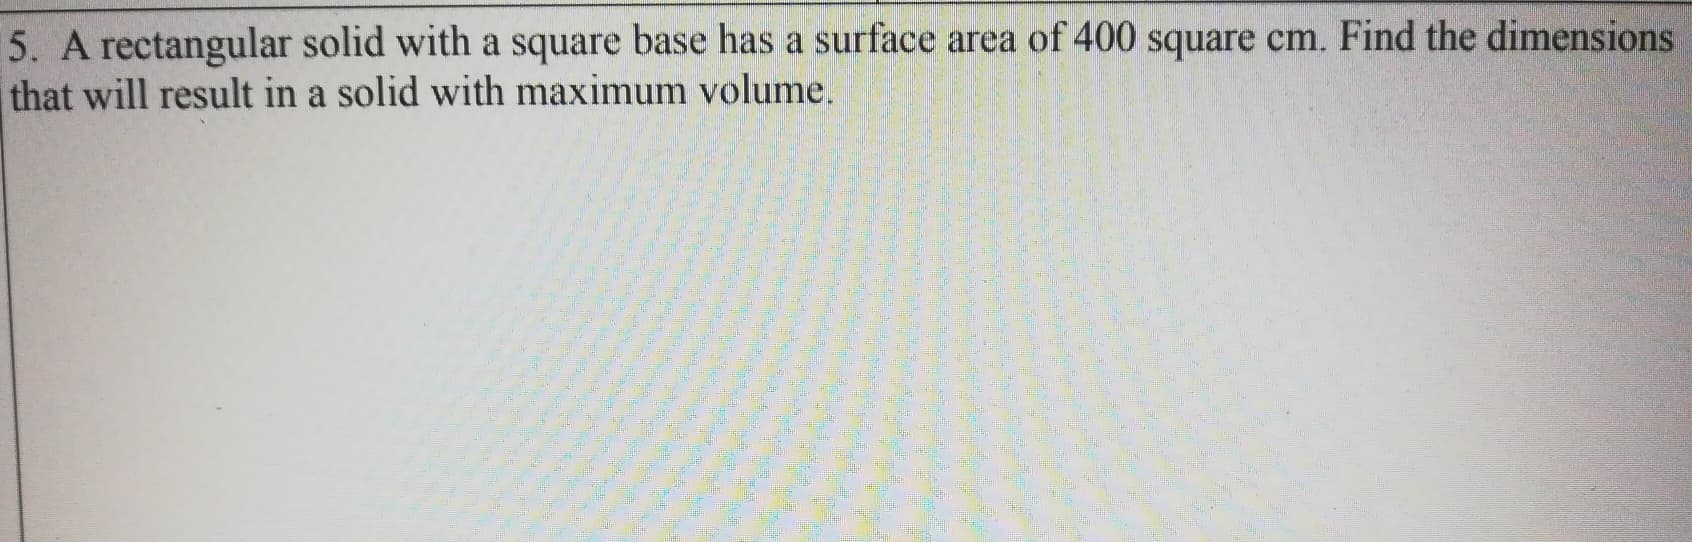 5. A rectangular solid with a square base has a surface area of 400 square cm. Find the dimensions
that will result in a solid with maximum volume.
